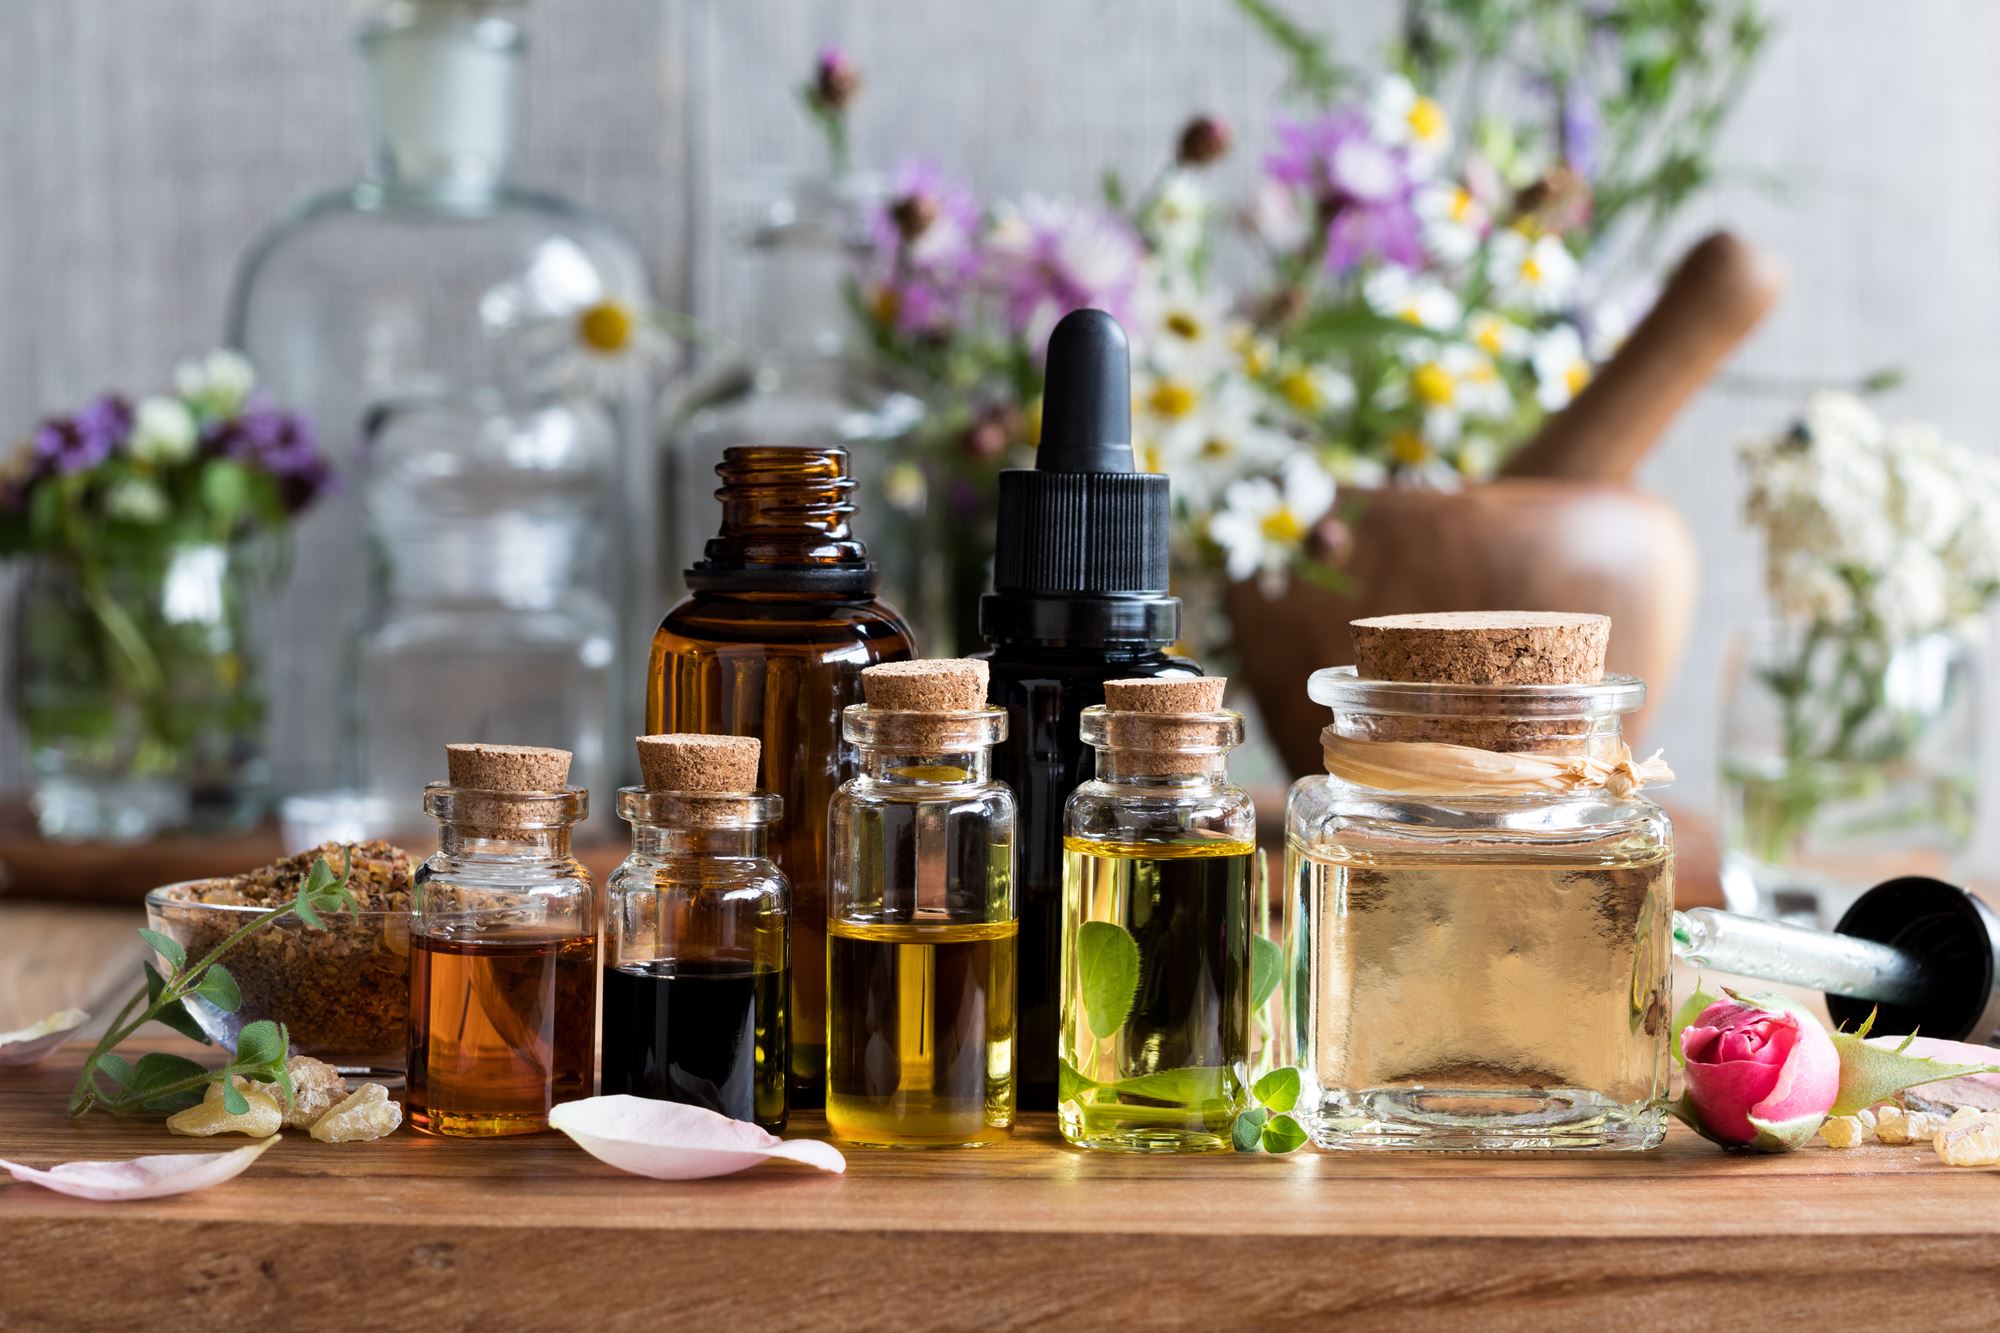 Essential oils during pregnancy and what you should avoid